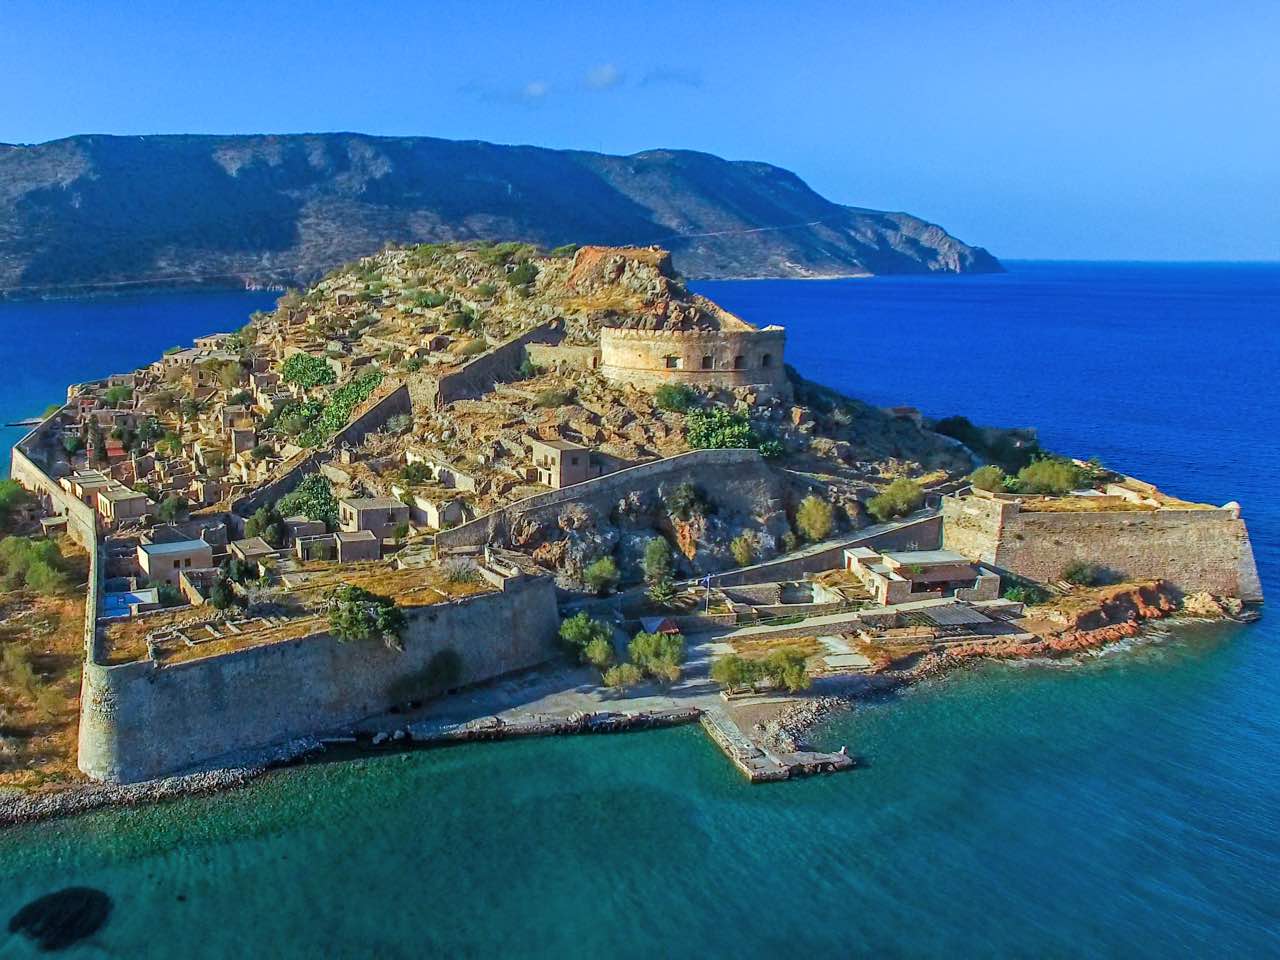 tailor made tours crete, tailor made tours chania crete, tailor made tours rethymno crete, tailor made tours heraklion crete, tailor made tours elounda village, traditional villages, culture history tours, social tours, historical tours, samaria gorge, chania town